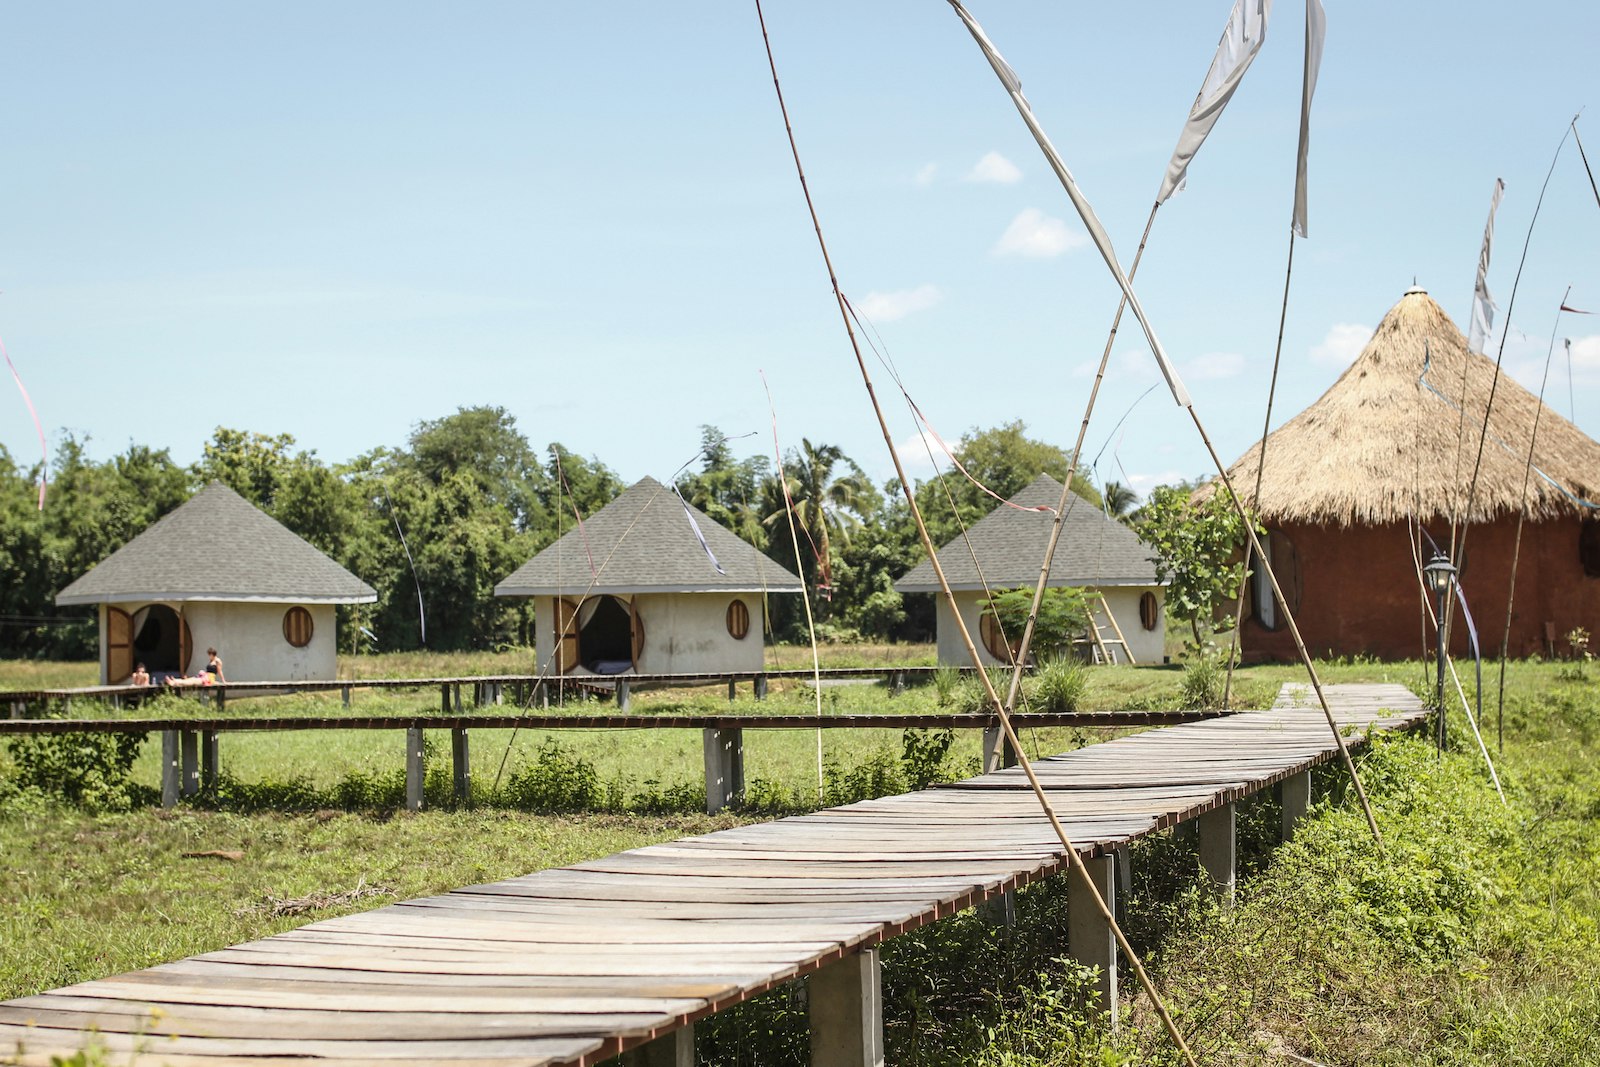 4 huts, one with a thatched roof with a boardwalk path leading to them